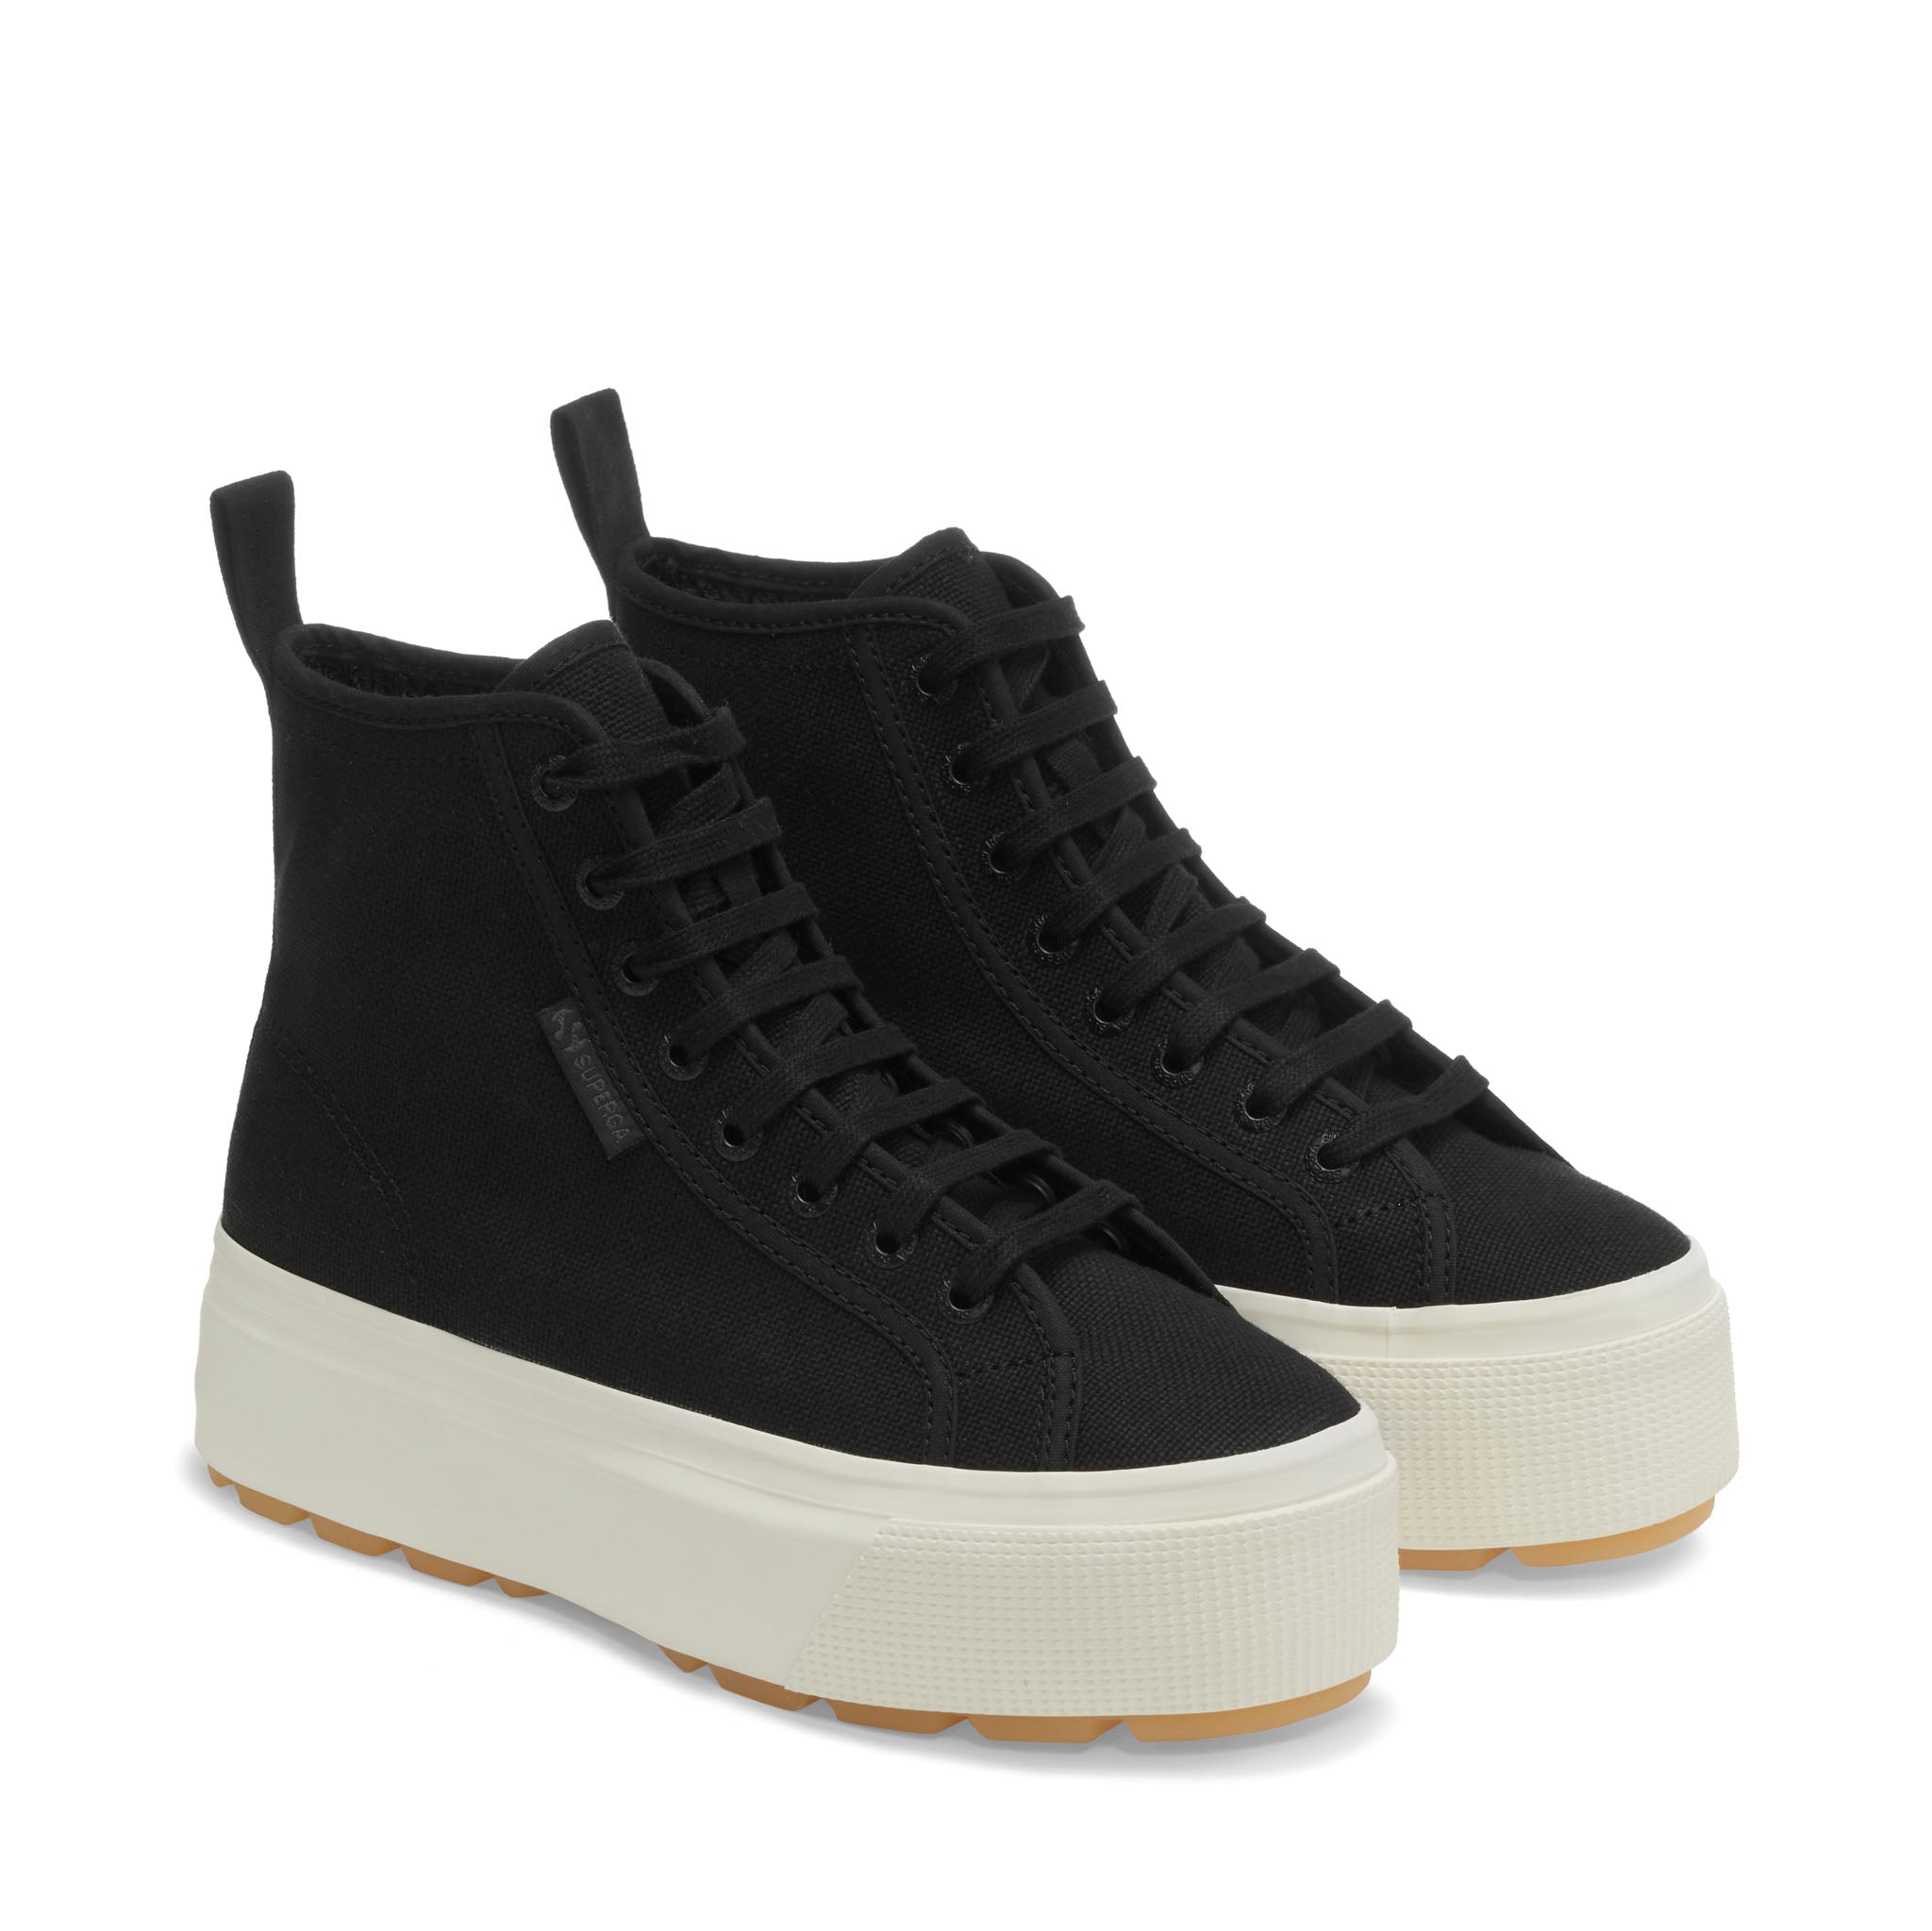 Superga 2708 High Top Tank Sneakers - Black. Front view.